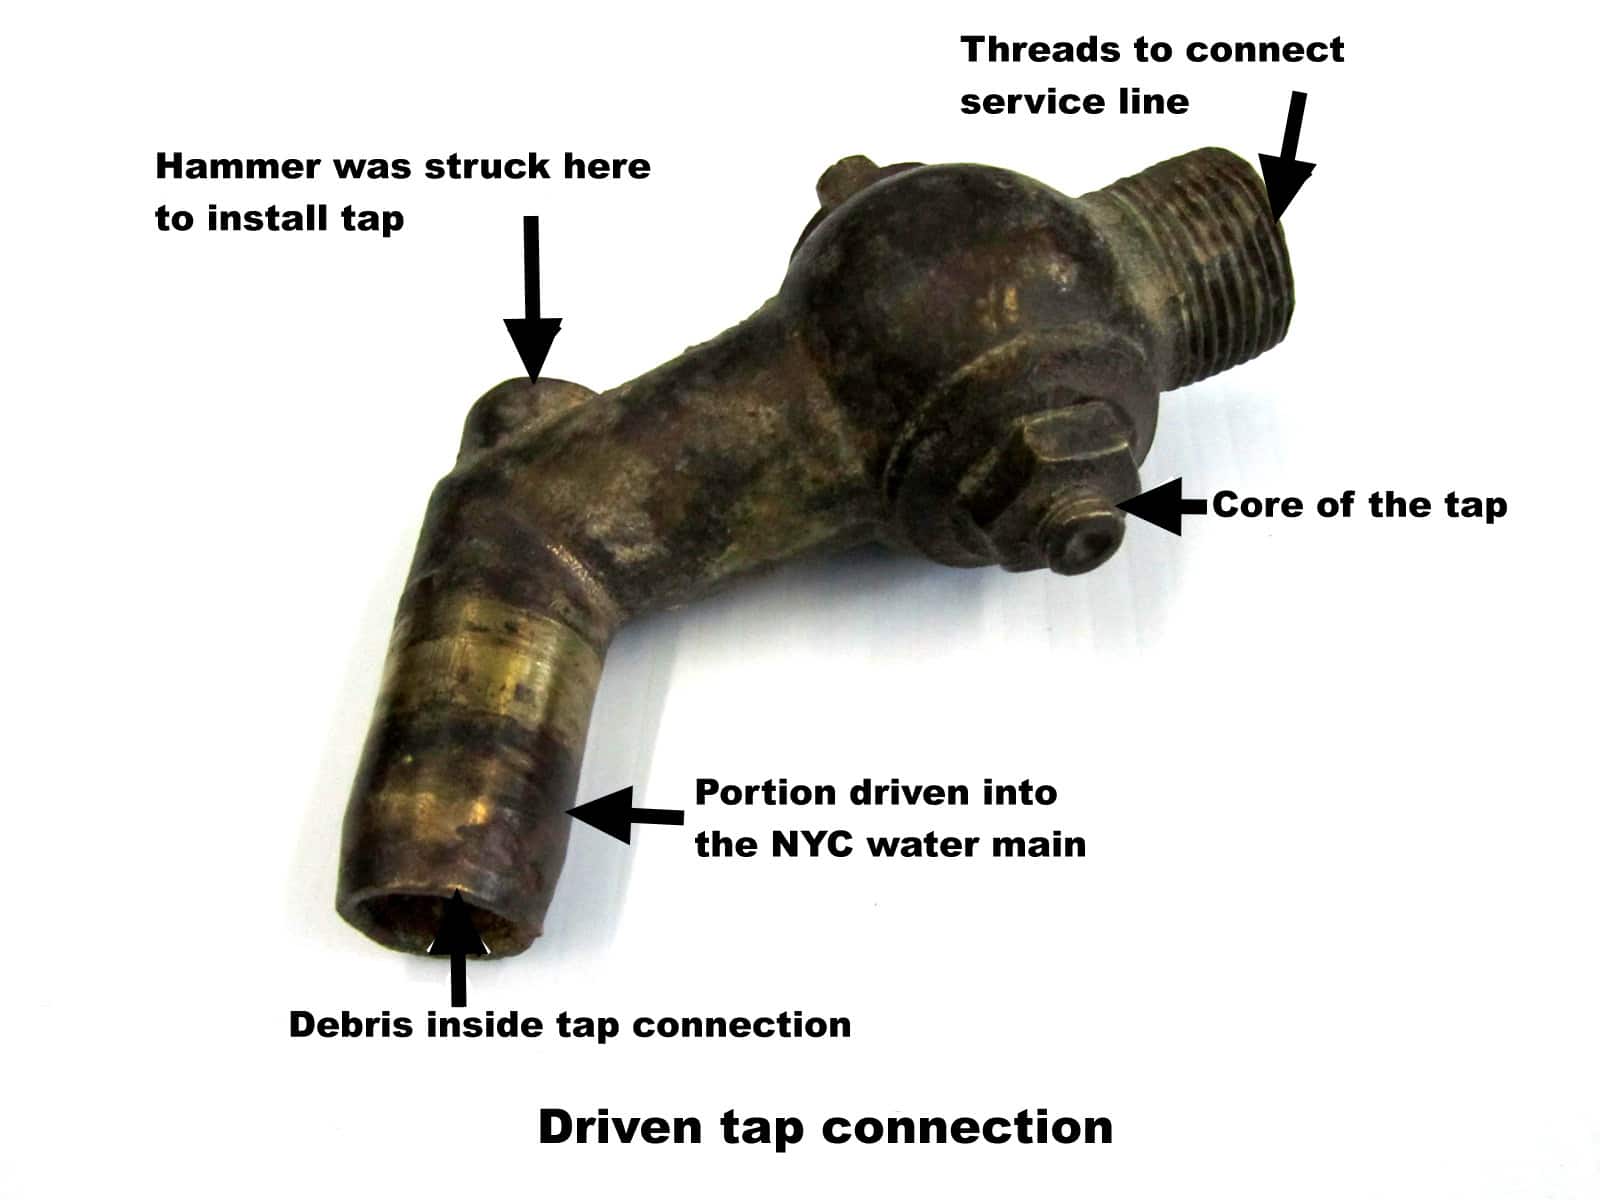 hand driven tap connection 1 1